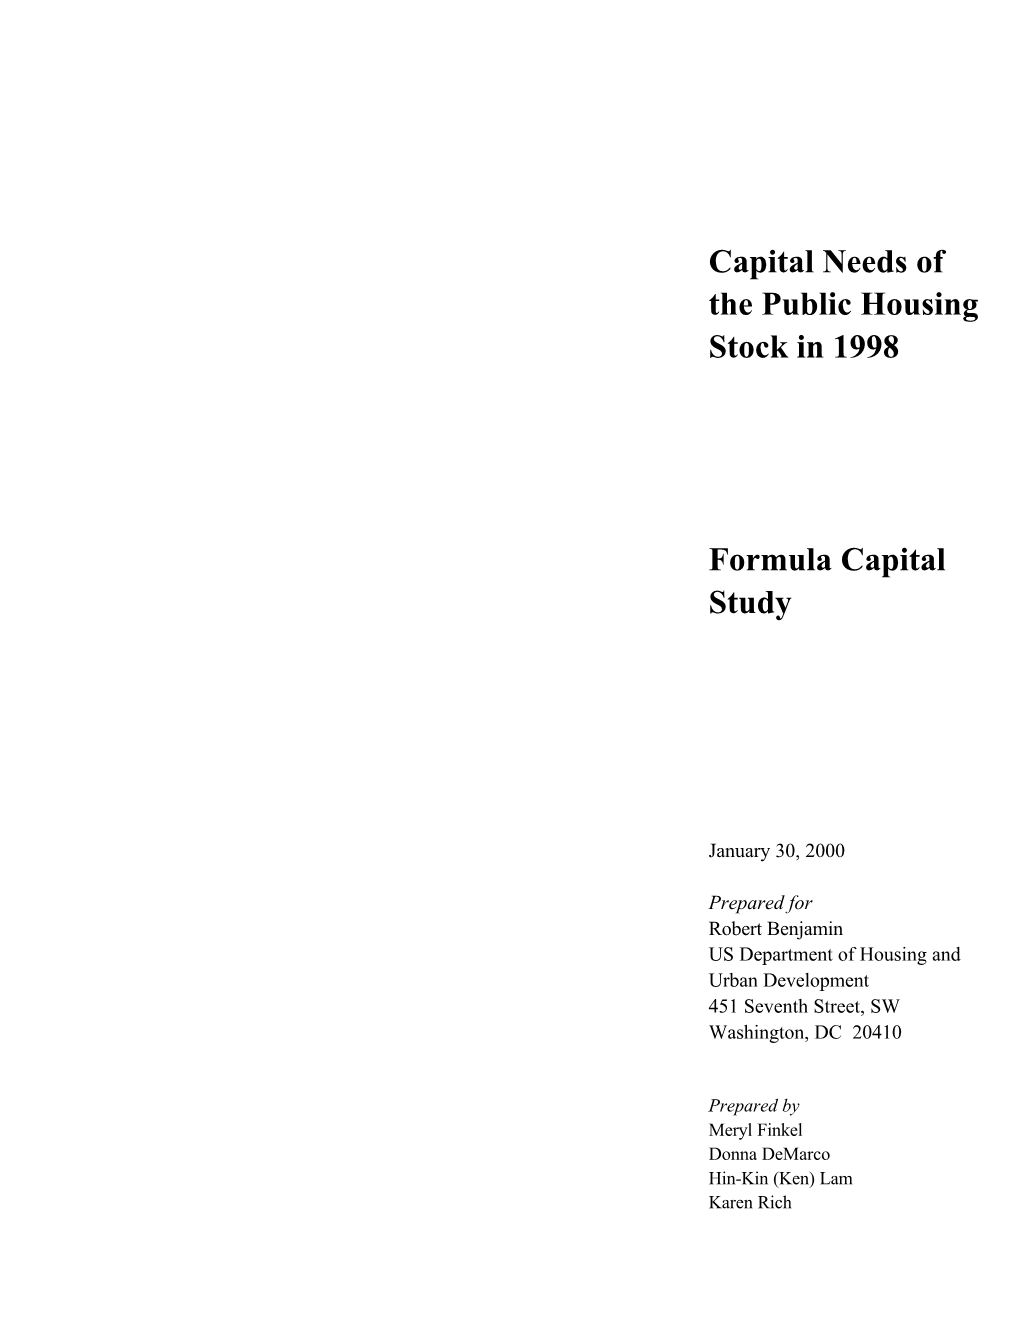 Capital Needs of the Public Housing Stock in 1998: Formula Capital Study